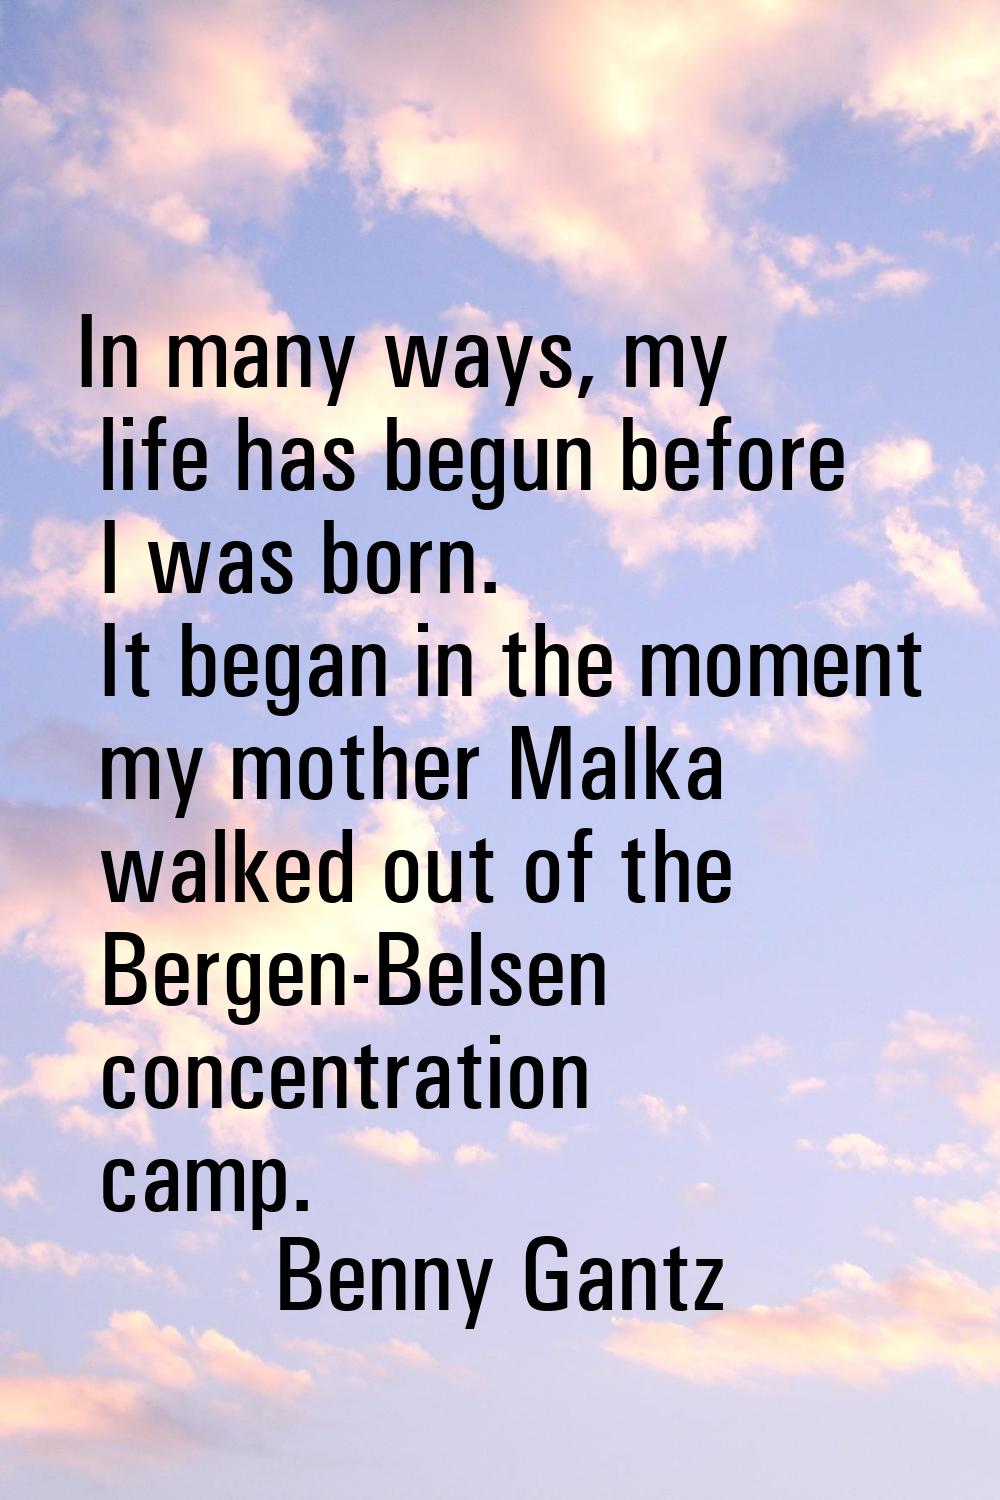 In many ways, my life has begun before I was born. It began in the moment my mother Malka walked ou